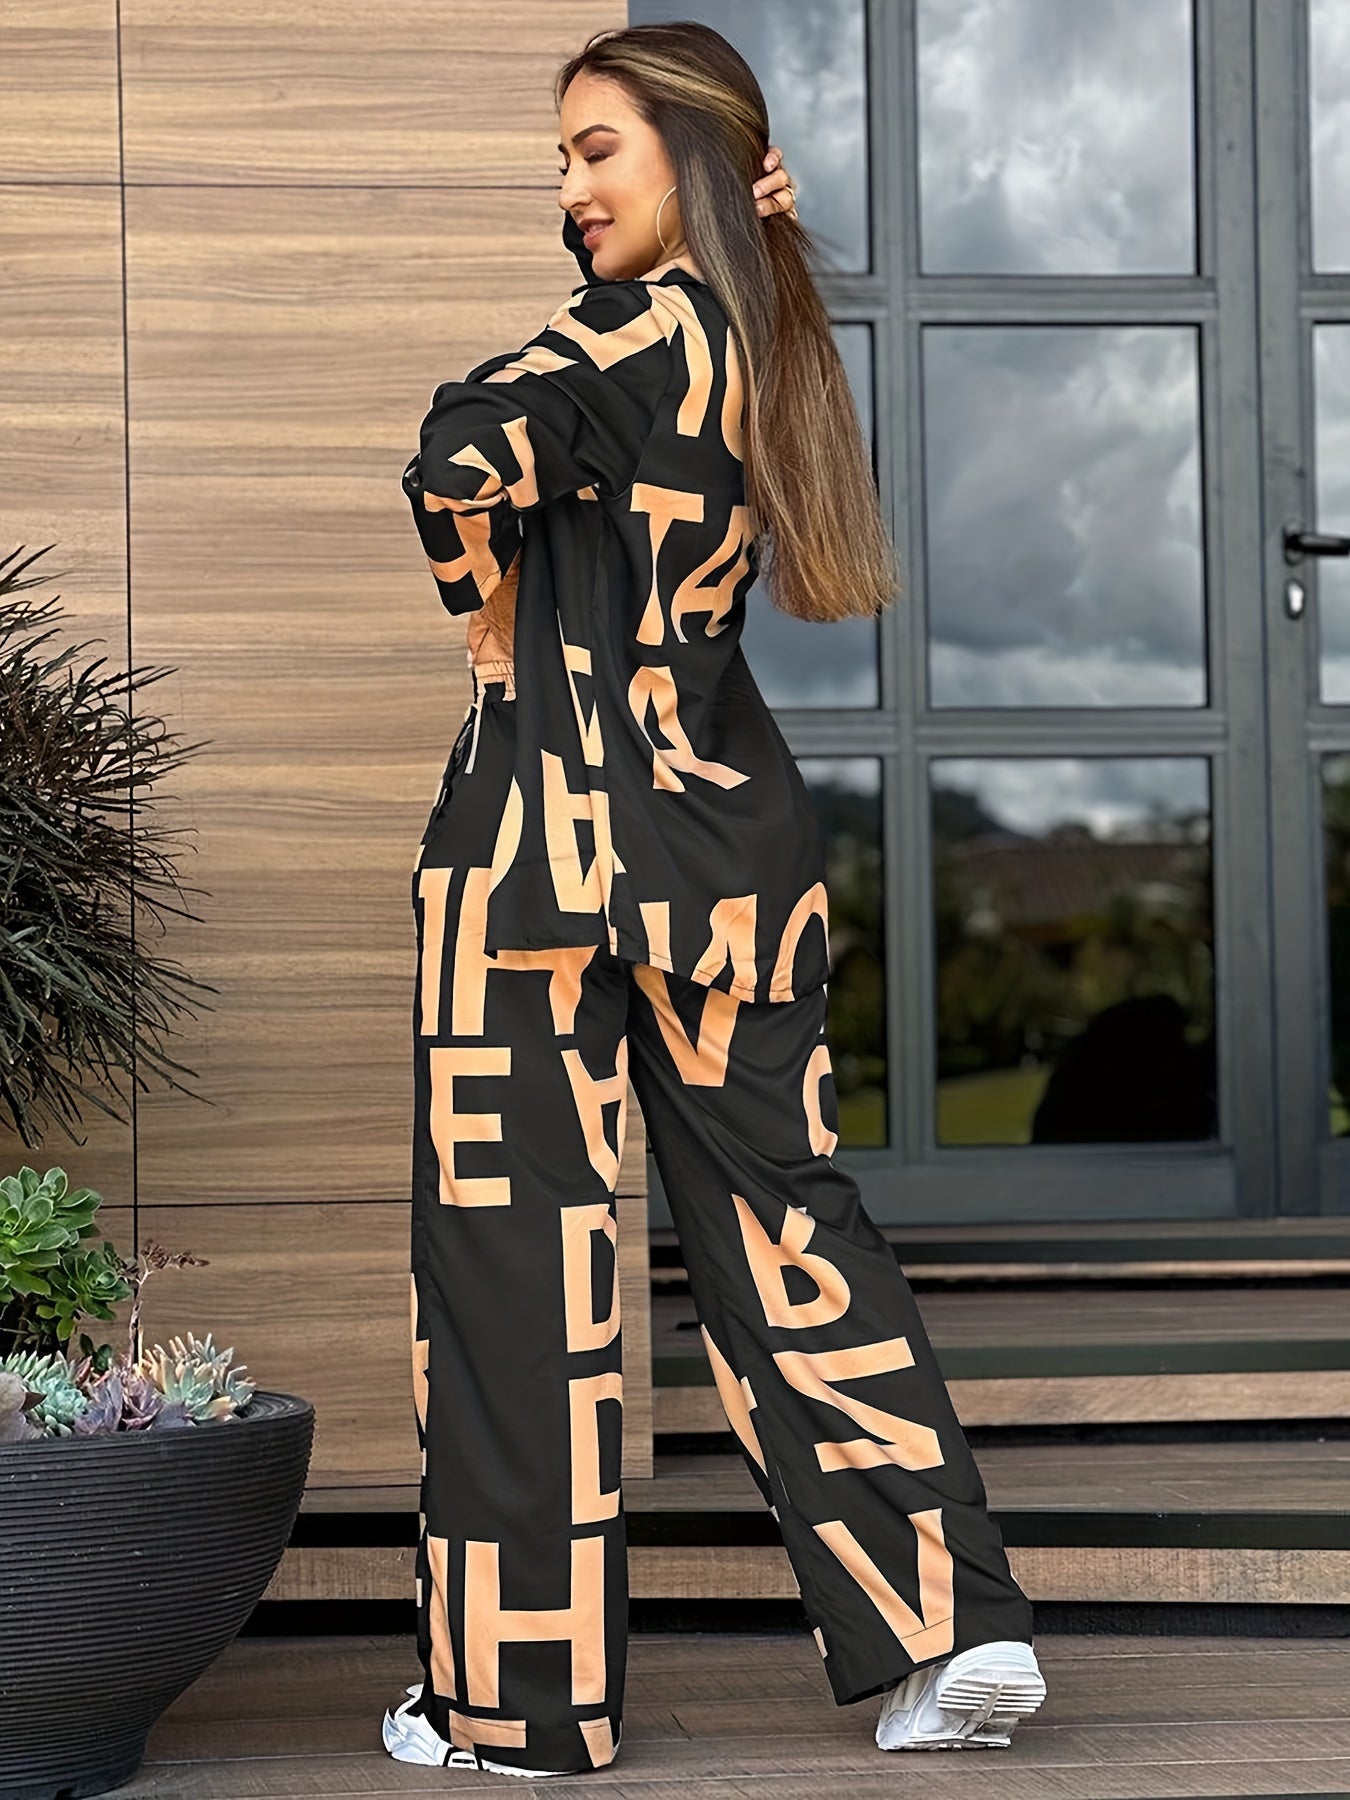 Antmvs Letter Print Casual Two-piece Set, Open Front Long Sleeve Tops & Wide Leg Pants Outfits, Women's Clothing